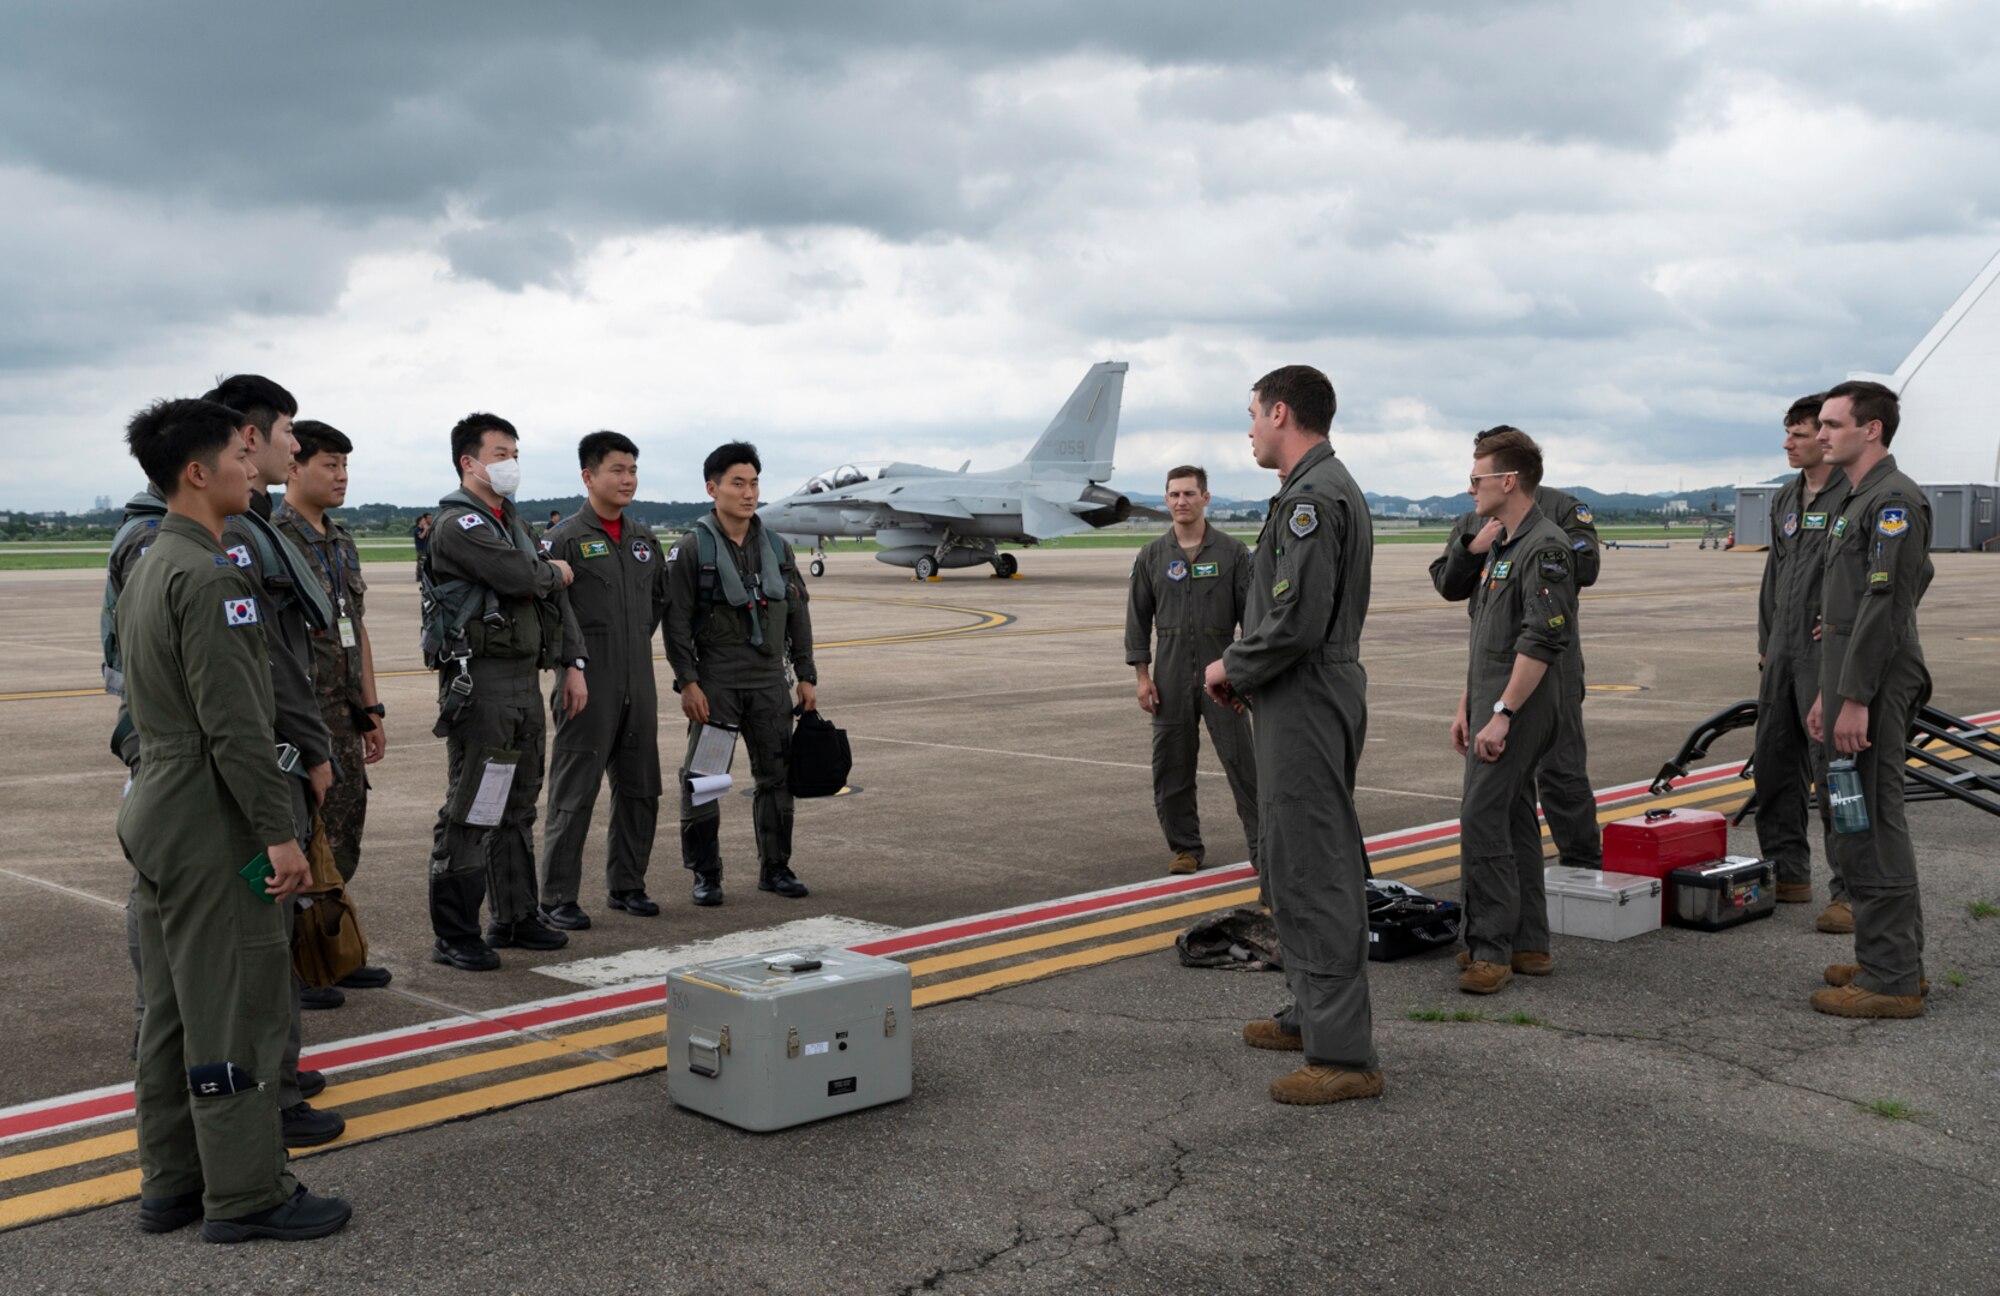 Republic of Korea Air Force pilots meet Airmen from the 25th Fighter Squadron after landing during Buddy Squadron 22 at Osan Air Base, Republic of Korea, Aug 2, 2022.